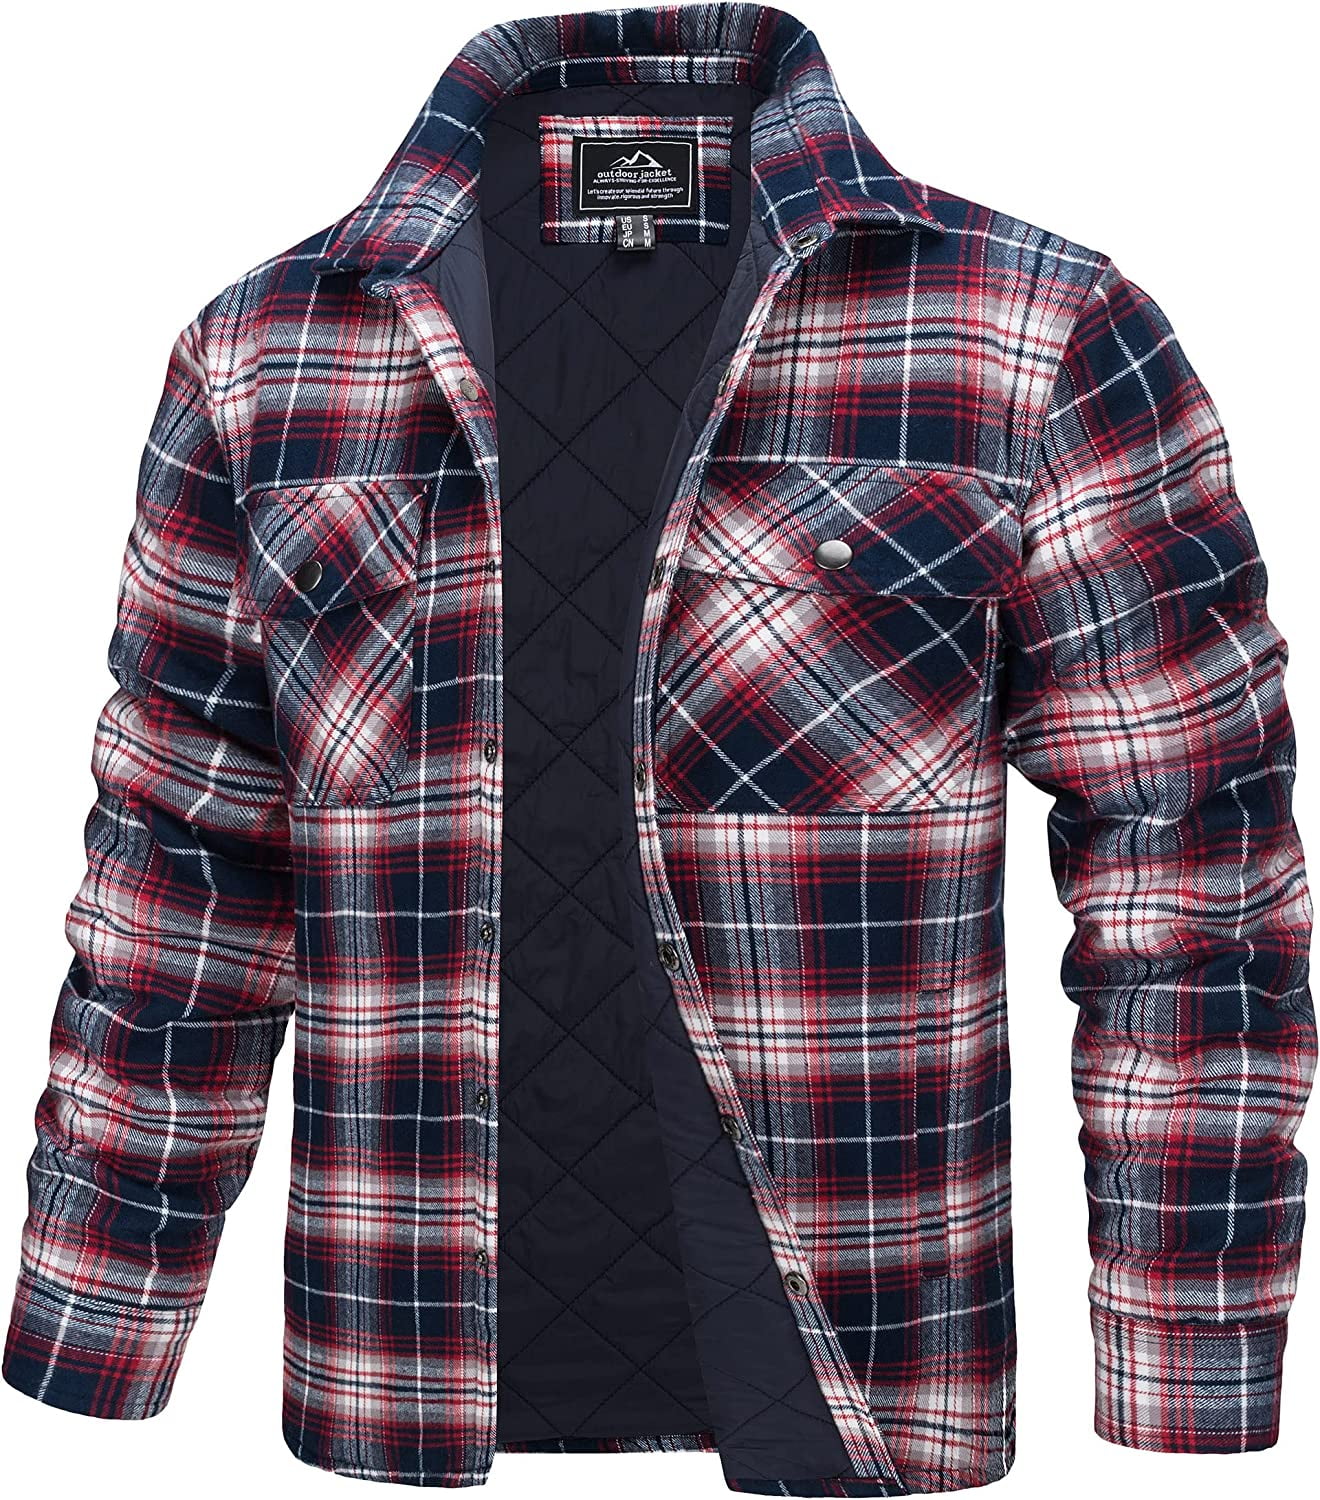 QWZNDZGR Men's Flannel Shirt Jacket Quilted Lined Long Sleeve 